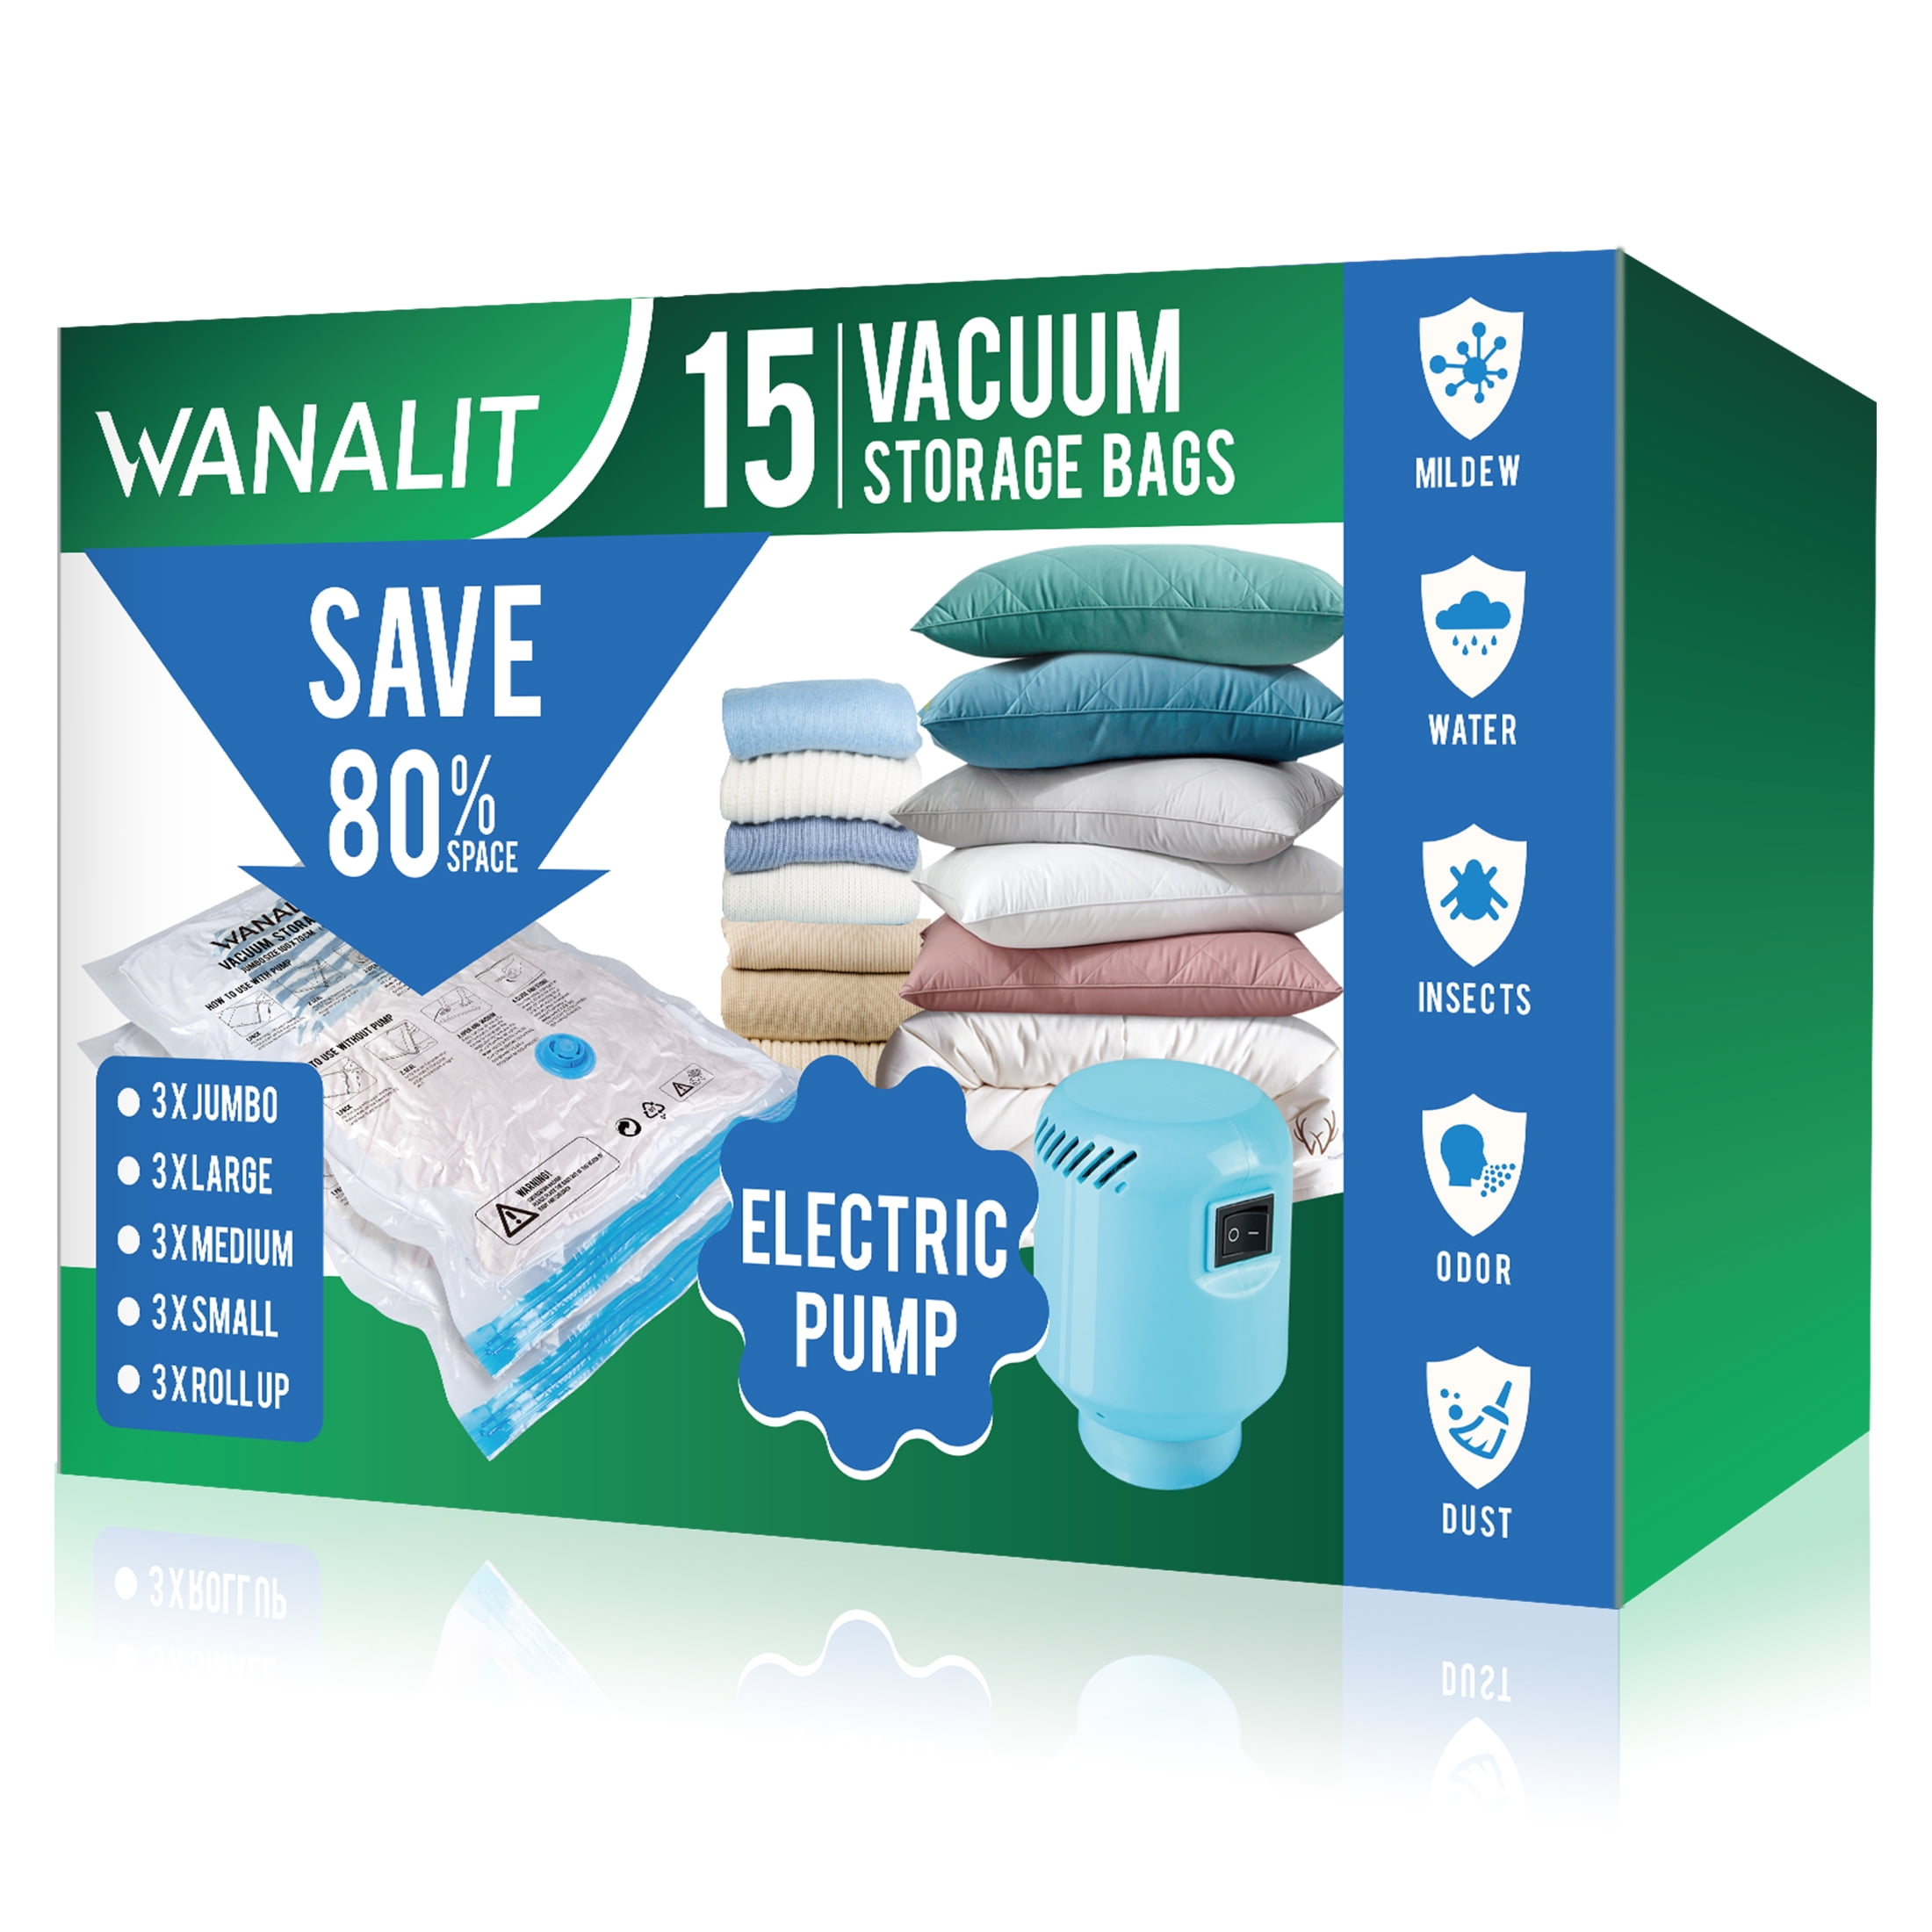 Vacuum Storage Bags with Electric Air Pump,15 Pack (3 Jumbo,3 Large,3  Medium,3 Small,3 Roll Up Vacuum Sealer Bags) Space Saver Bag for  Clothes,Blanket,Duvets,Pillows,Comforters,Travel 